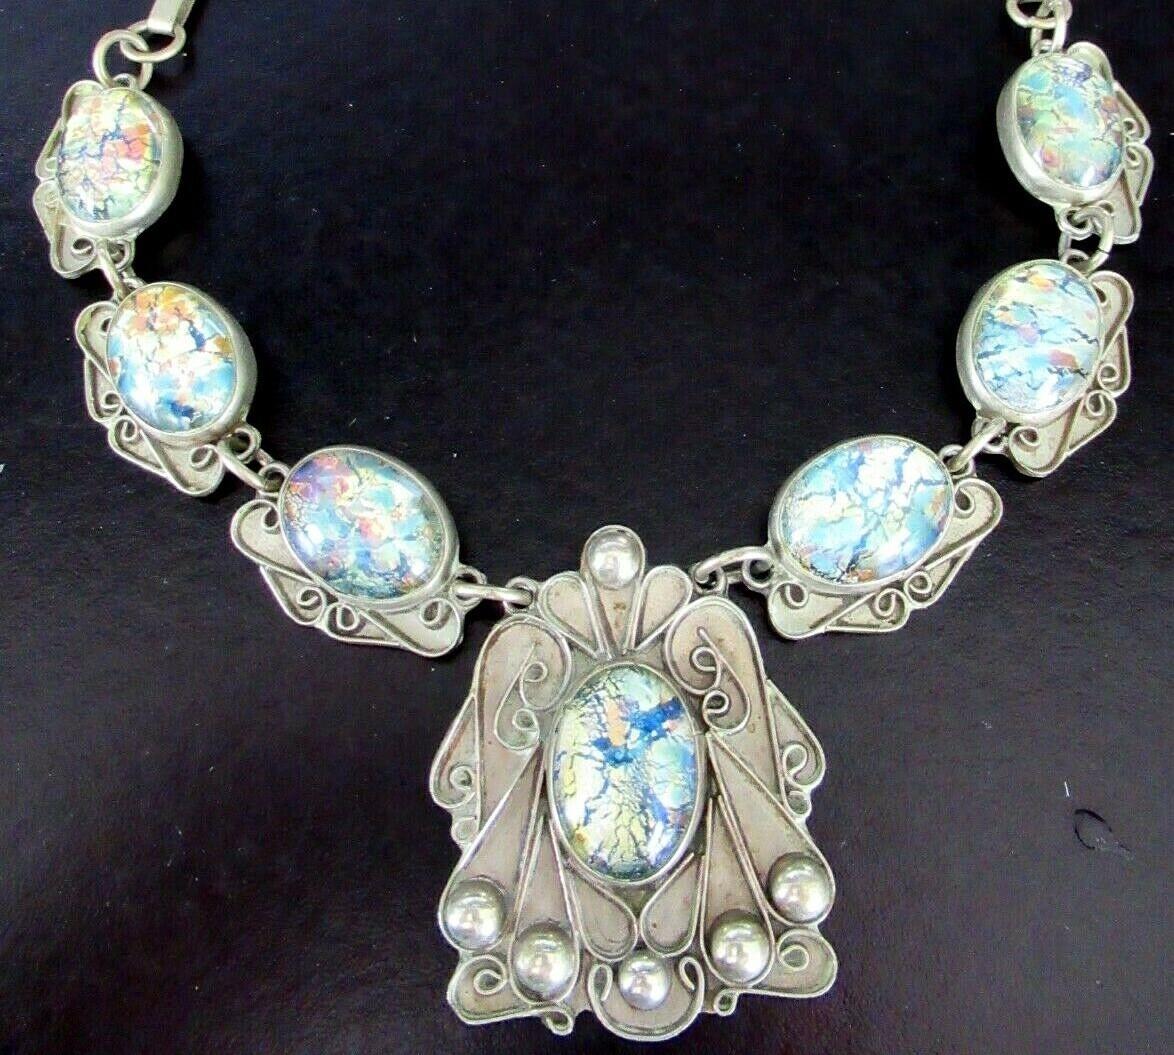 Antique Art Nouveau Necklace set with 7 Foil set vibrant Opal Cabochons. Hand crafted in Sterling Silver. The Silver work is exceptional, very typical of the Art Nouveau style. Approx.  22.5